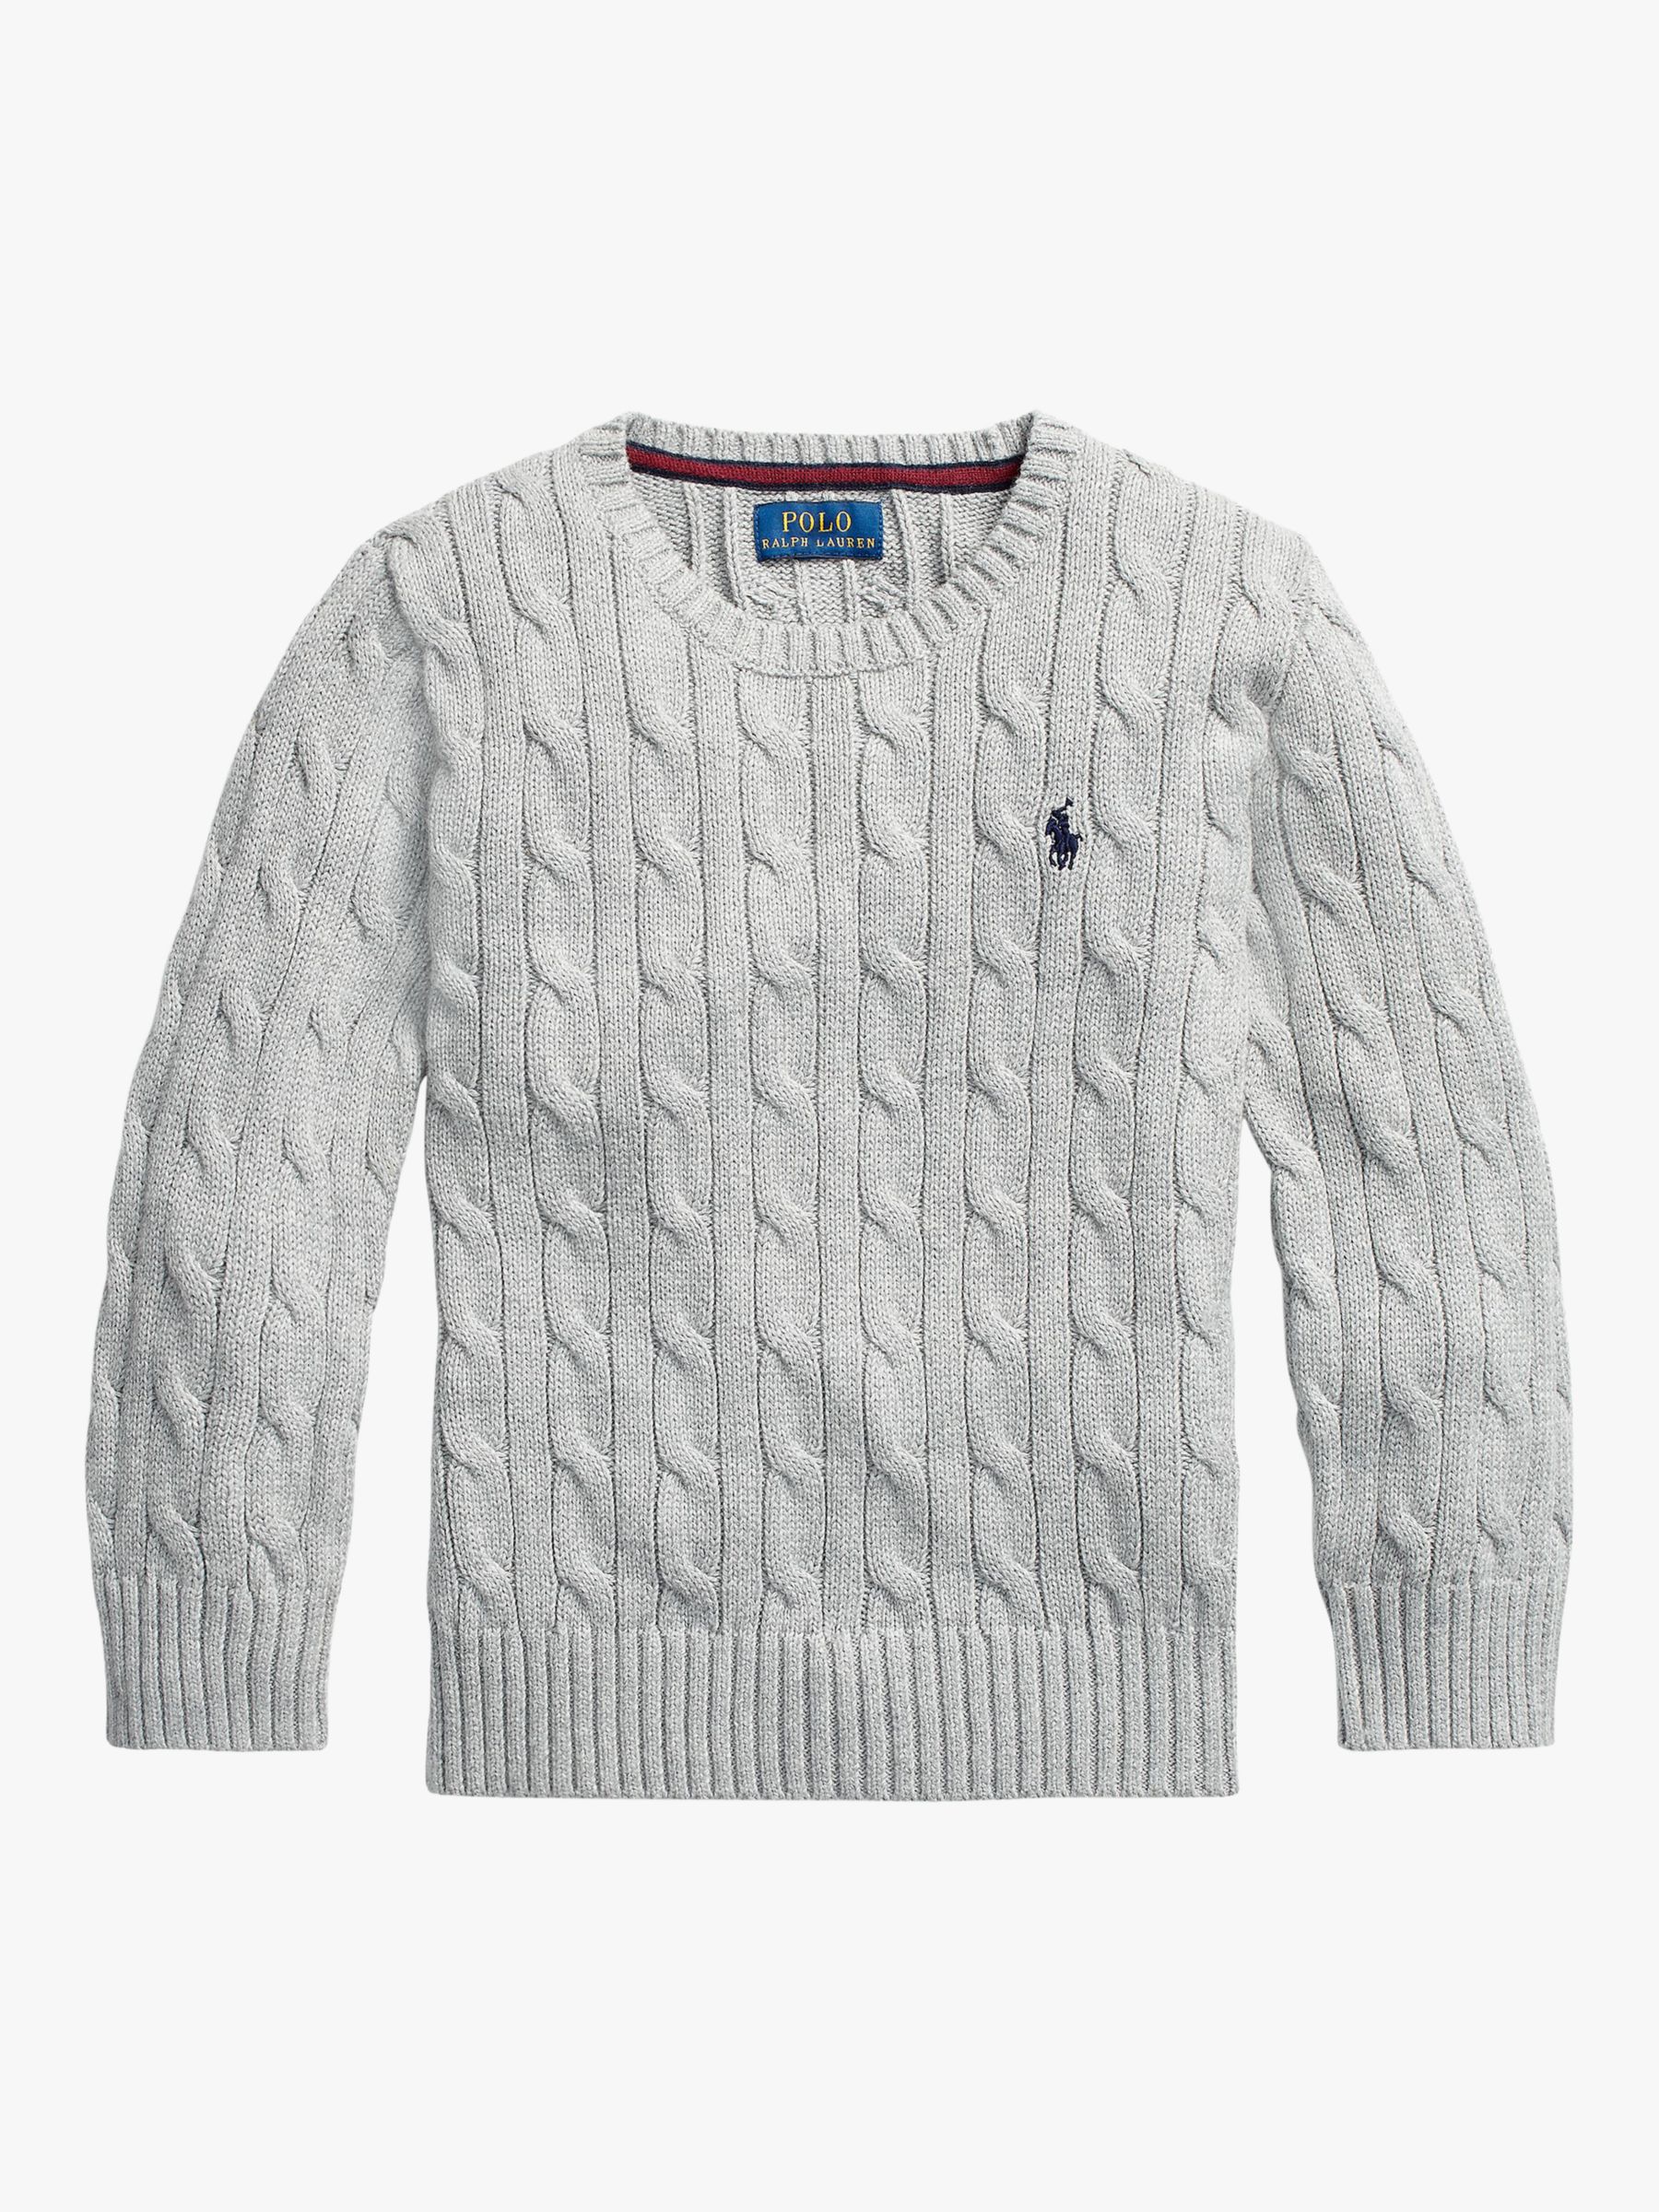 Polo Ralph Lauren Kids' Long Sleeve Cable Jumper, Grey at John Lewis ...